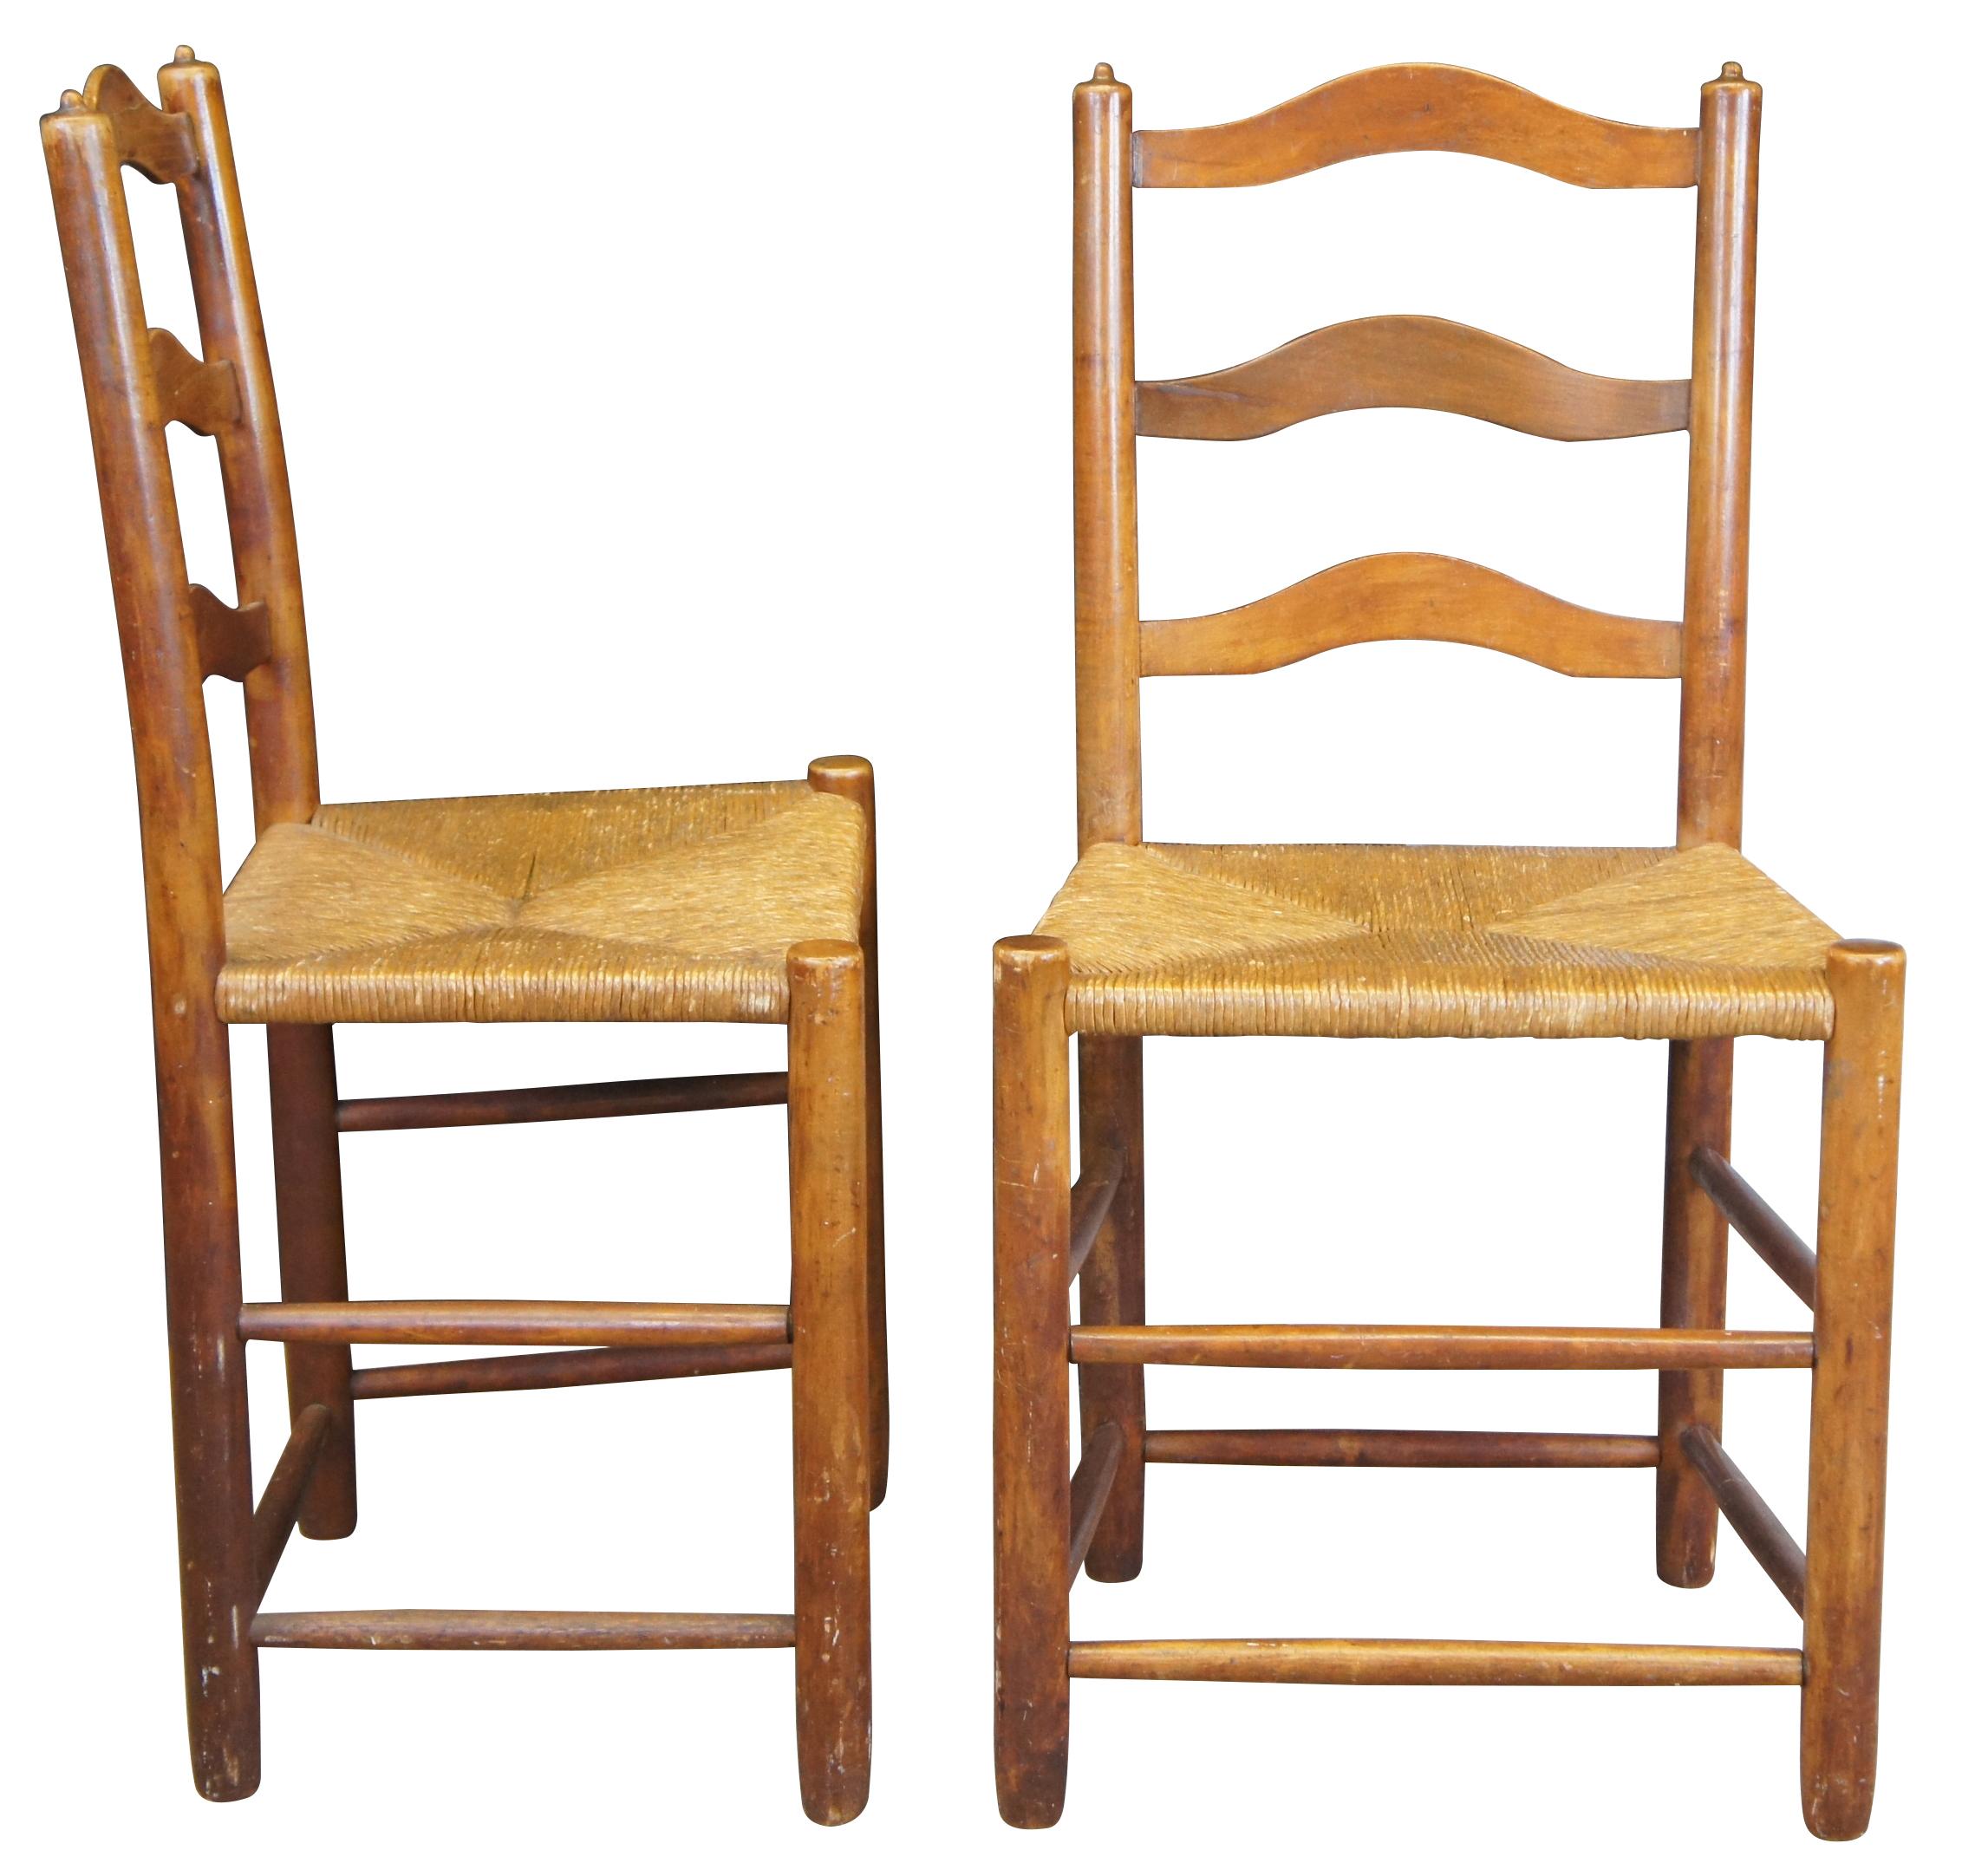 Set of four vintage original Stickley side dining chairs. Made of maple featuring serpentine ladderback and rush seat. Marked on base, Stickley, Fayetteville Syracuse. This mark was used by L. & J.G. Stickley as well as Stickley MFG Co. from